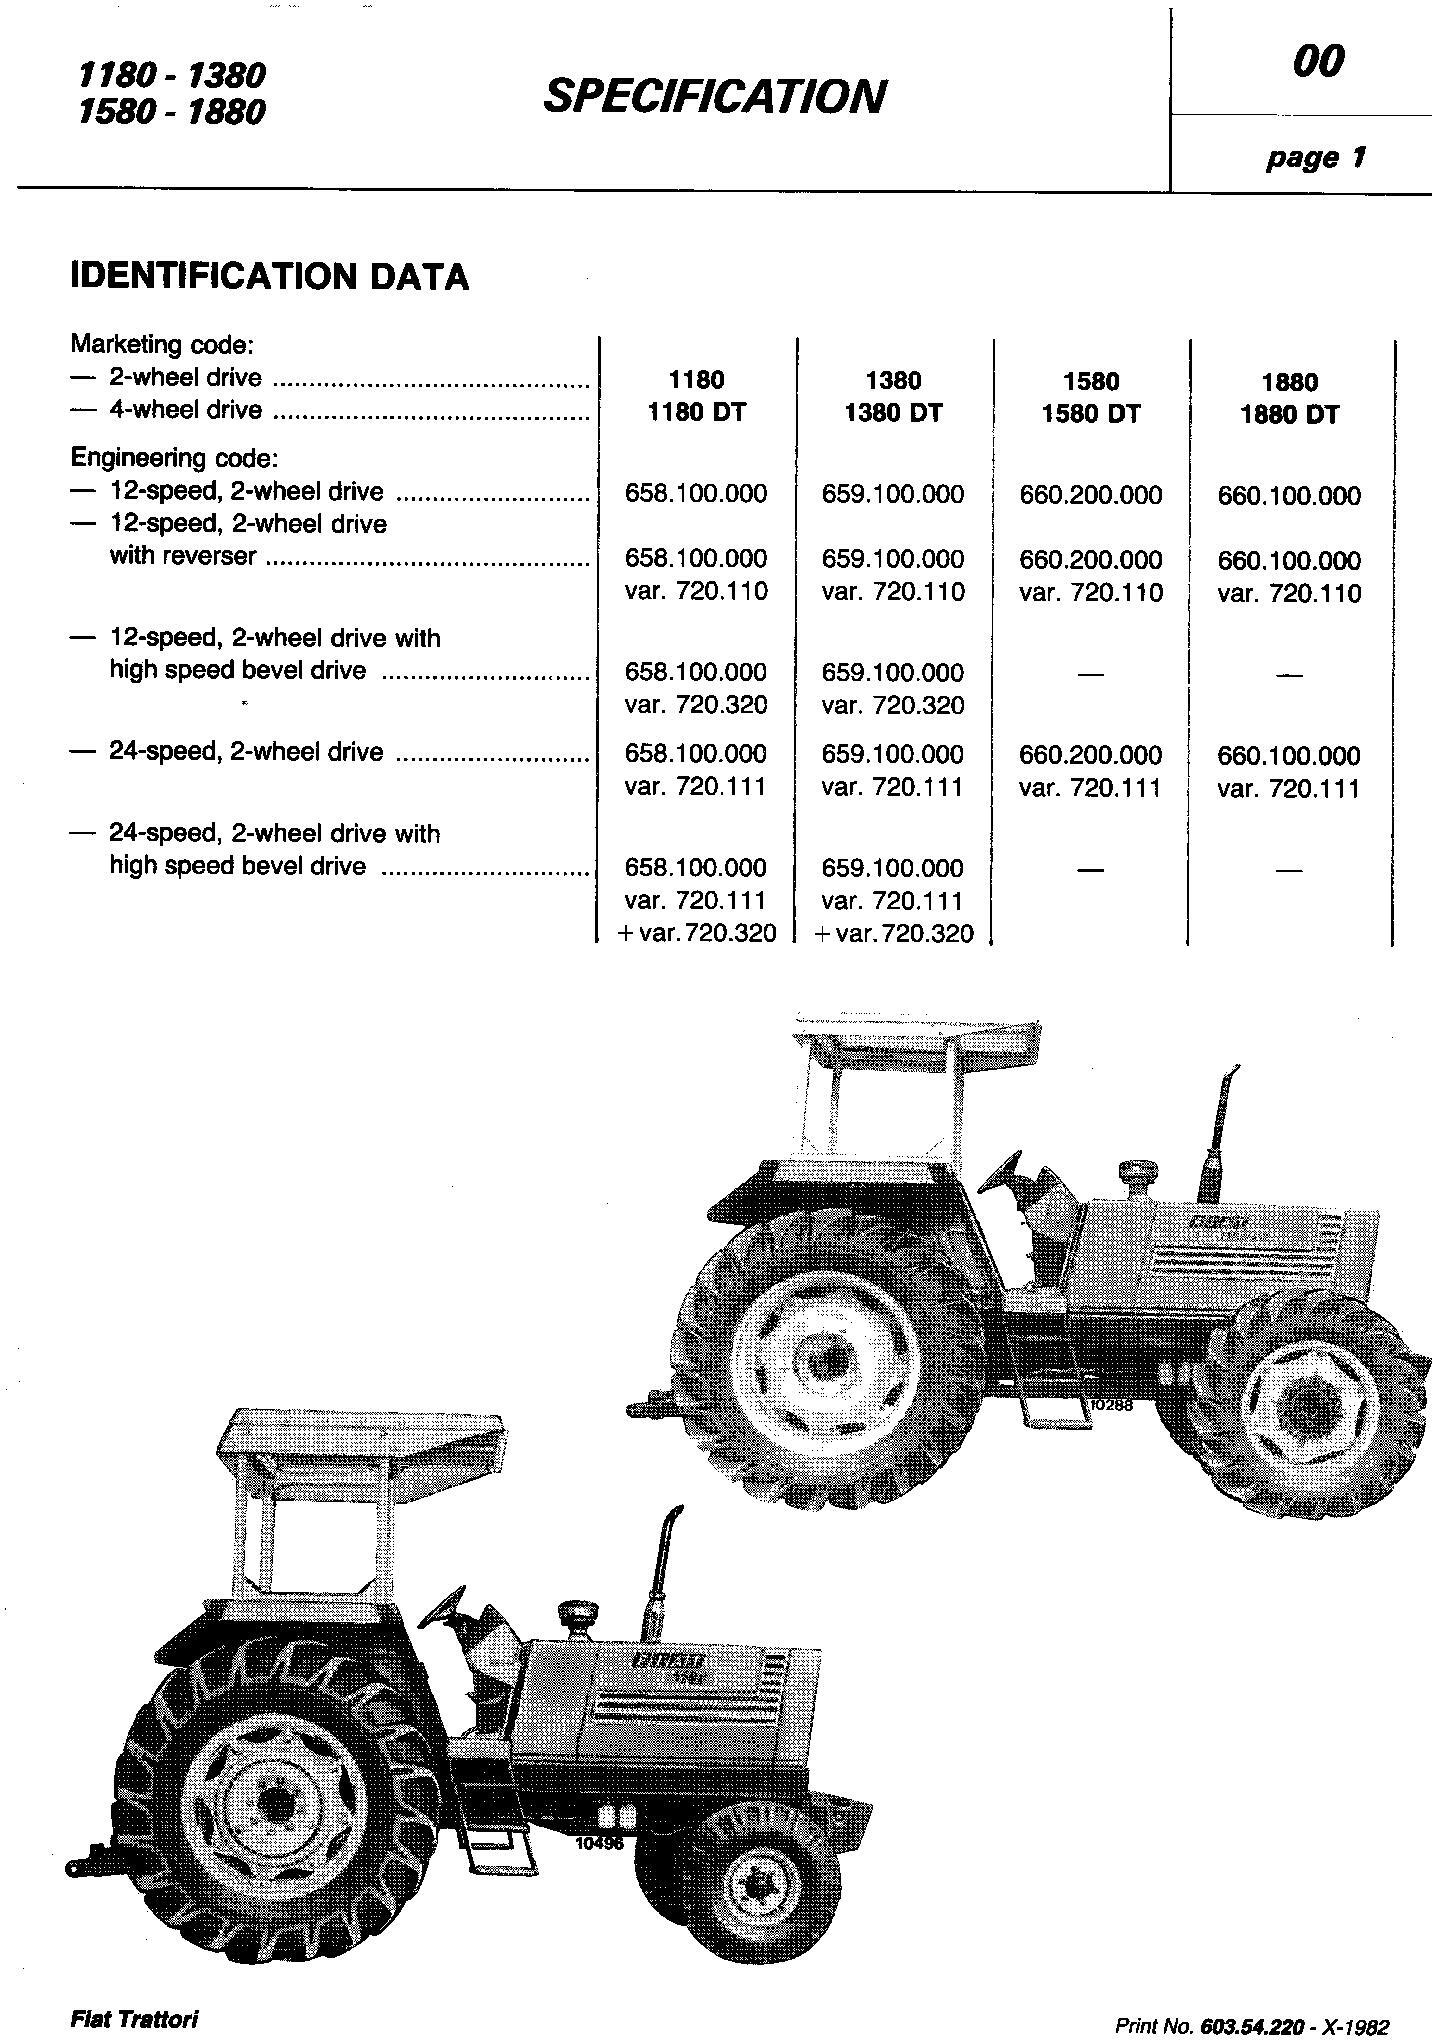 Fiat 1180, 1280, 1380, 1580, 1880 (DT) Tractor Service Manual (6035422000) - 1